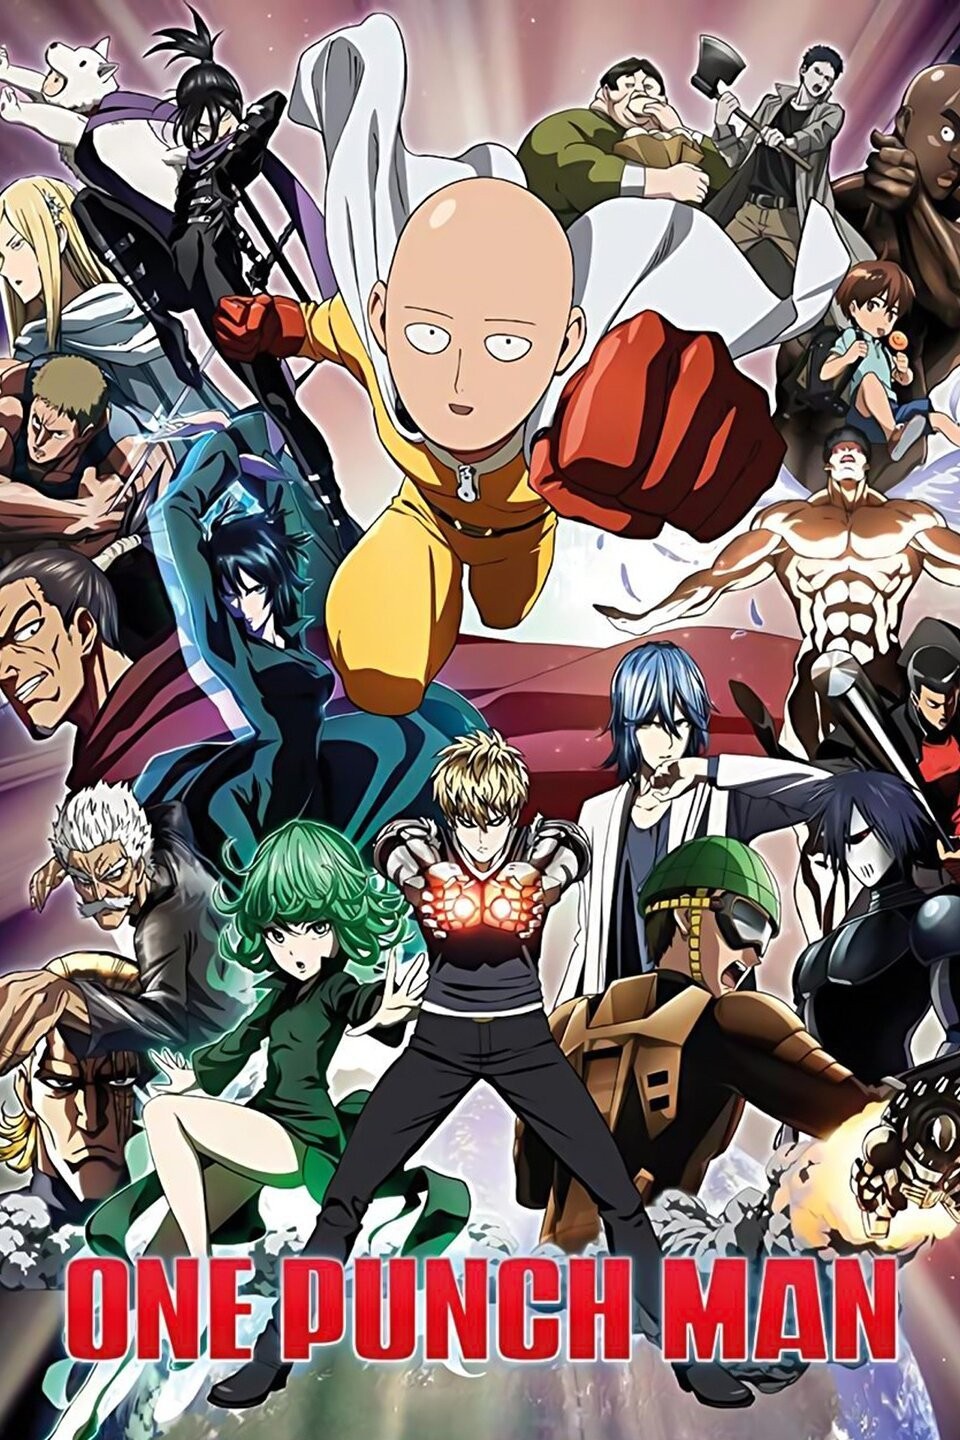 One-Punch Man Season 2 Release Date, Streaming Site Announced - IGN